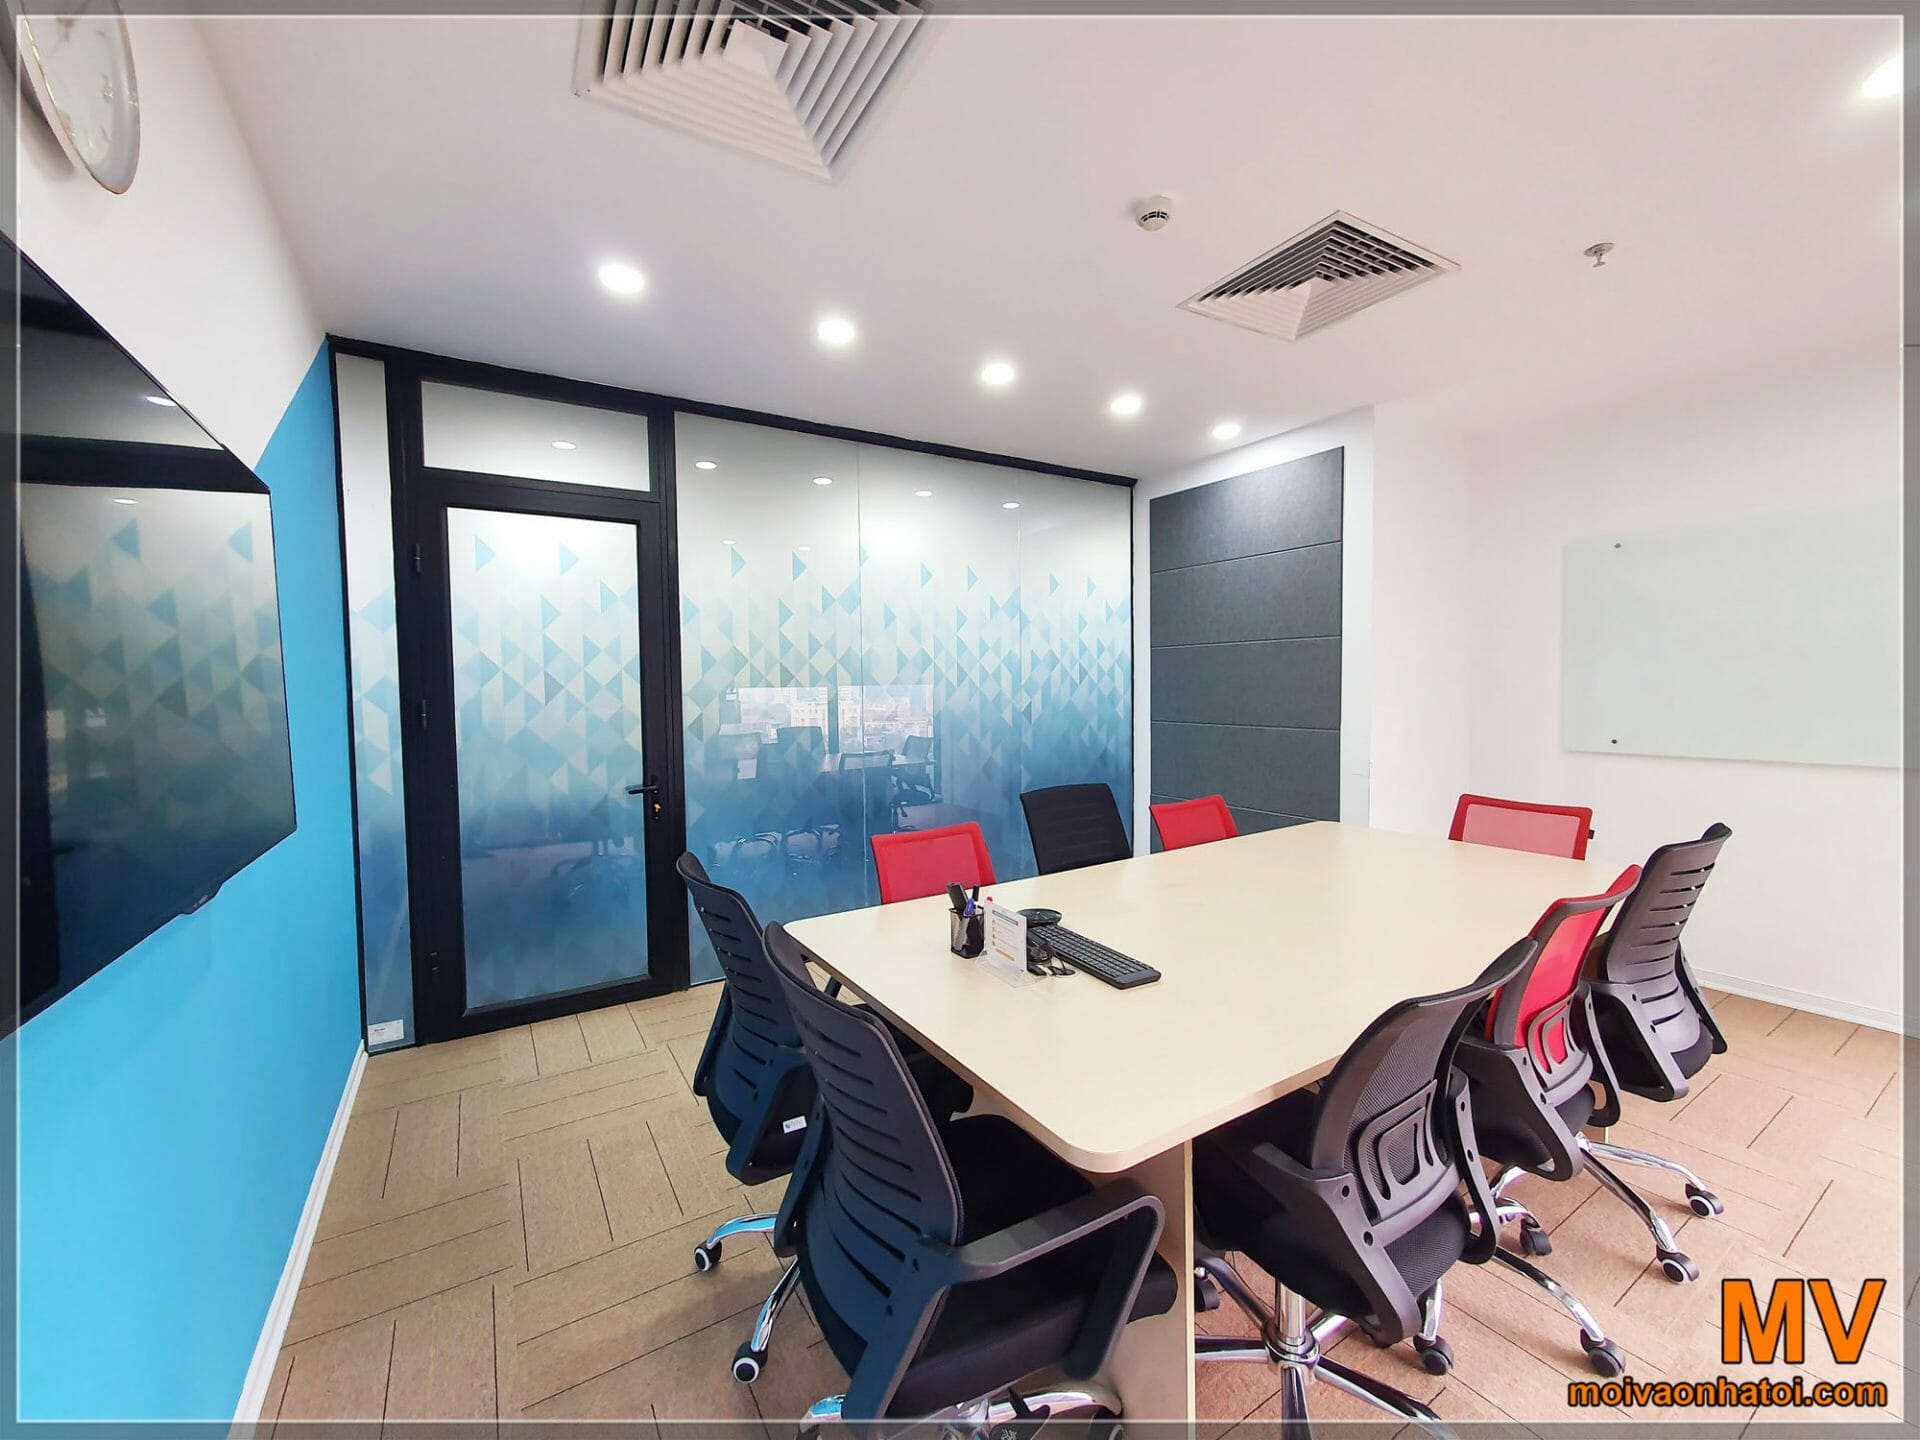 small meeting room area